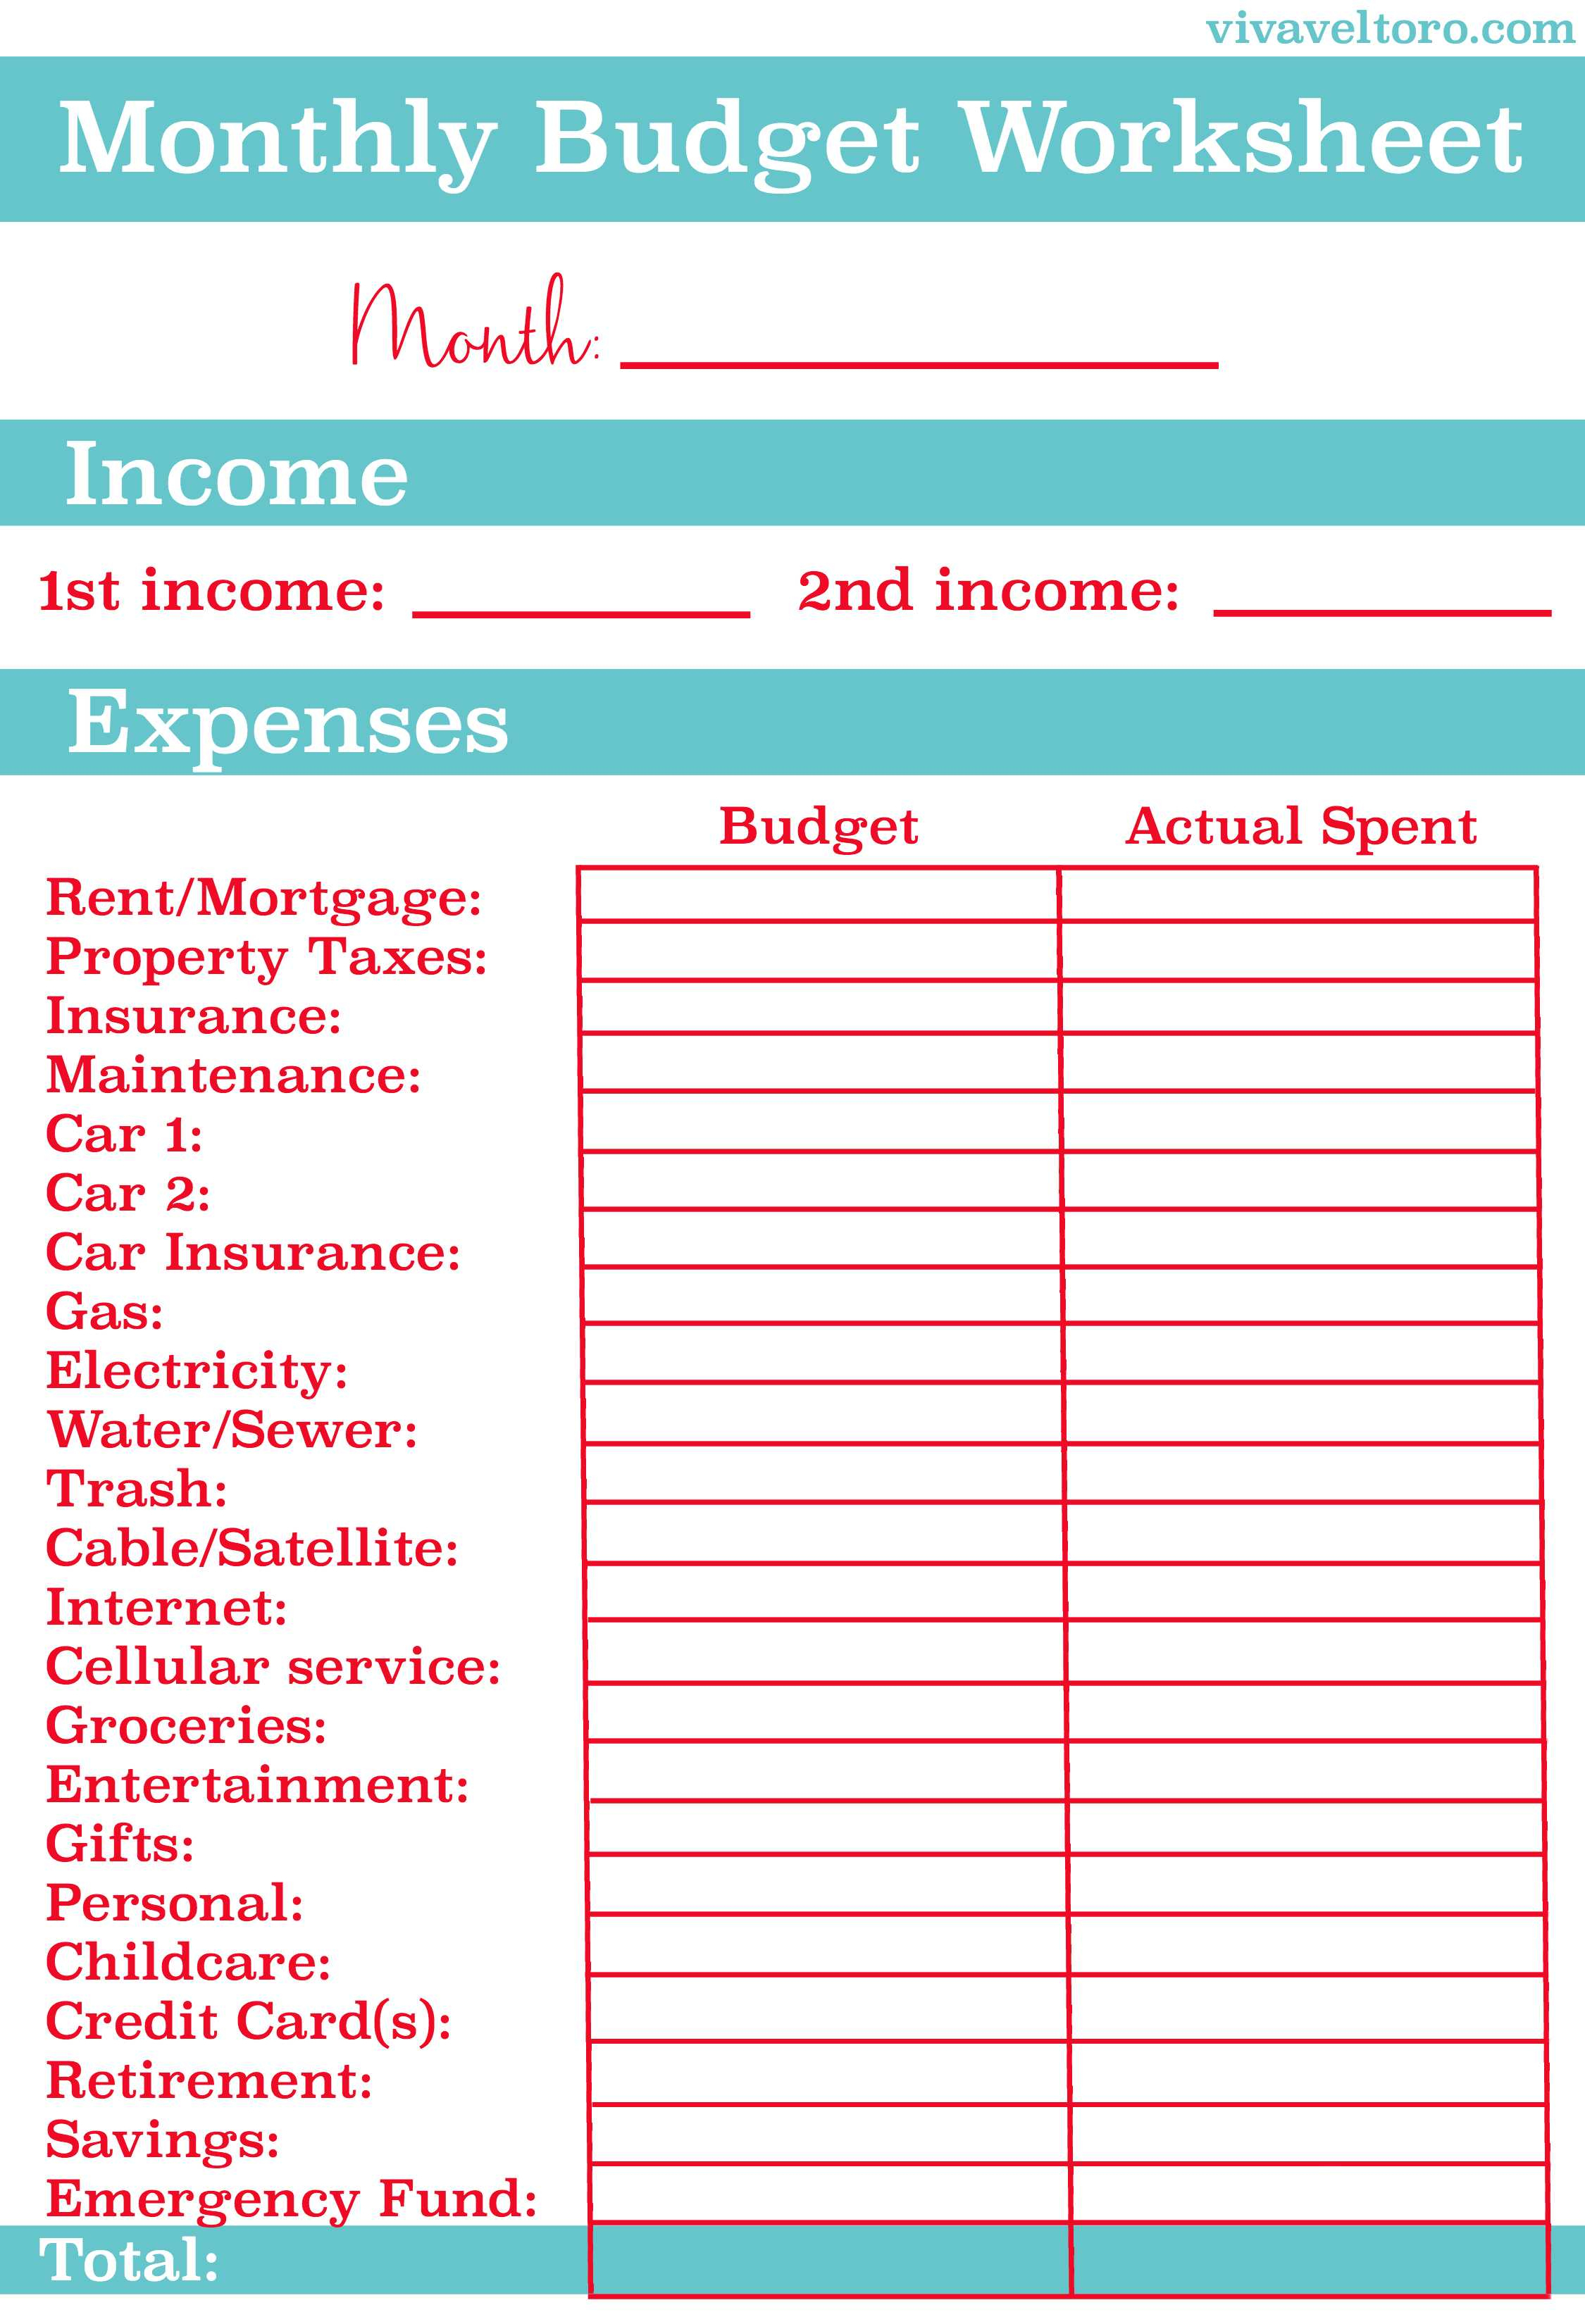 Free Mileage Expense Report Template Budget Spreadsheet Excel Online - Free Online Printable Budget Worksheet